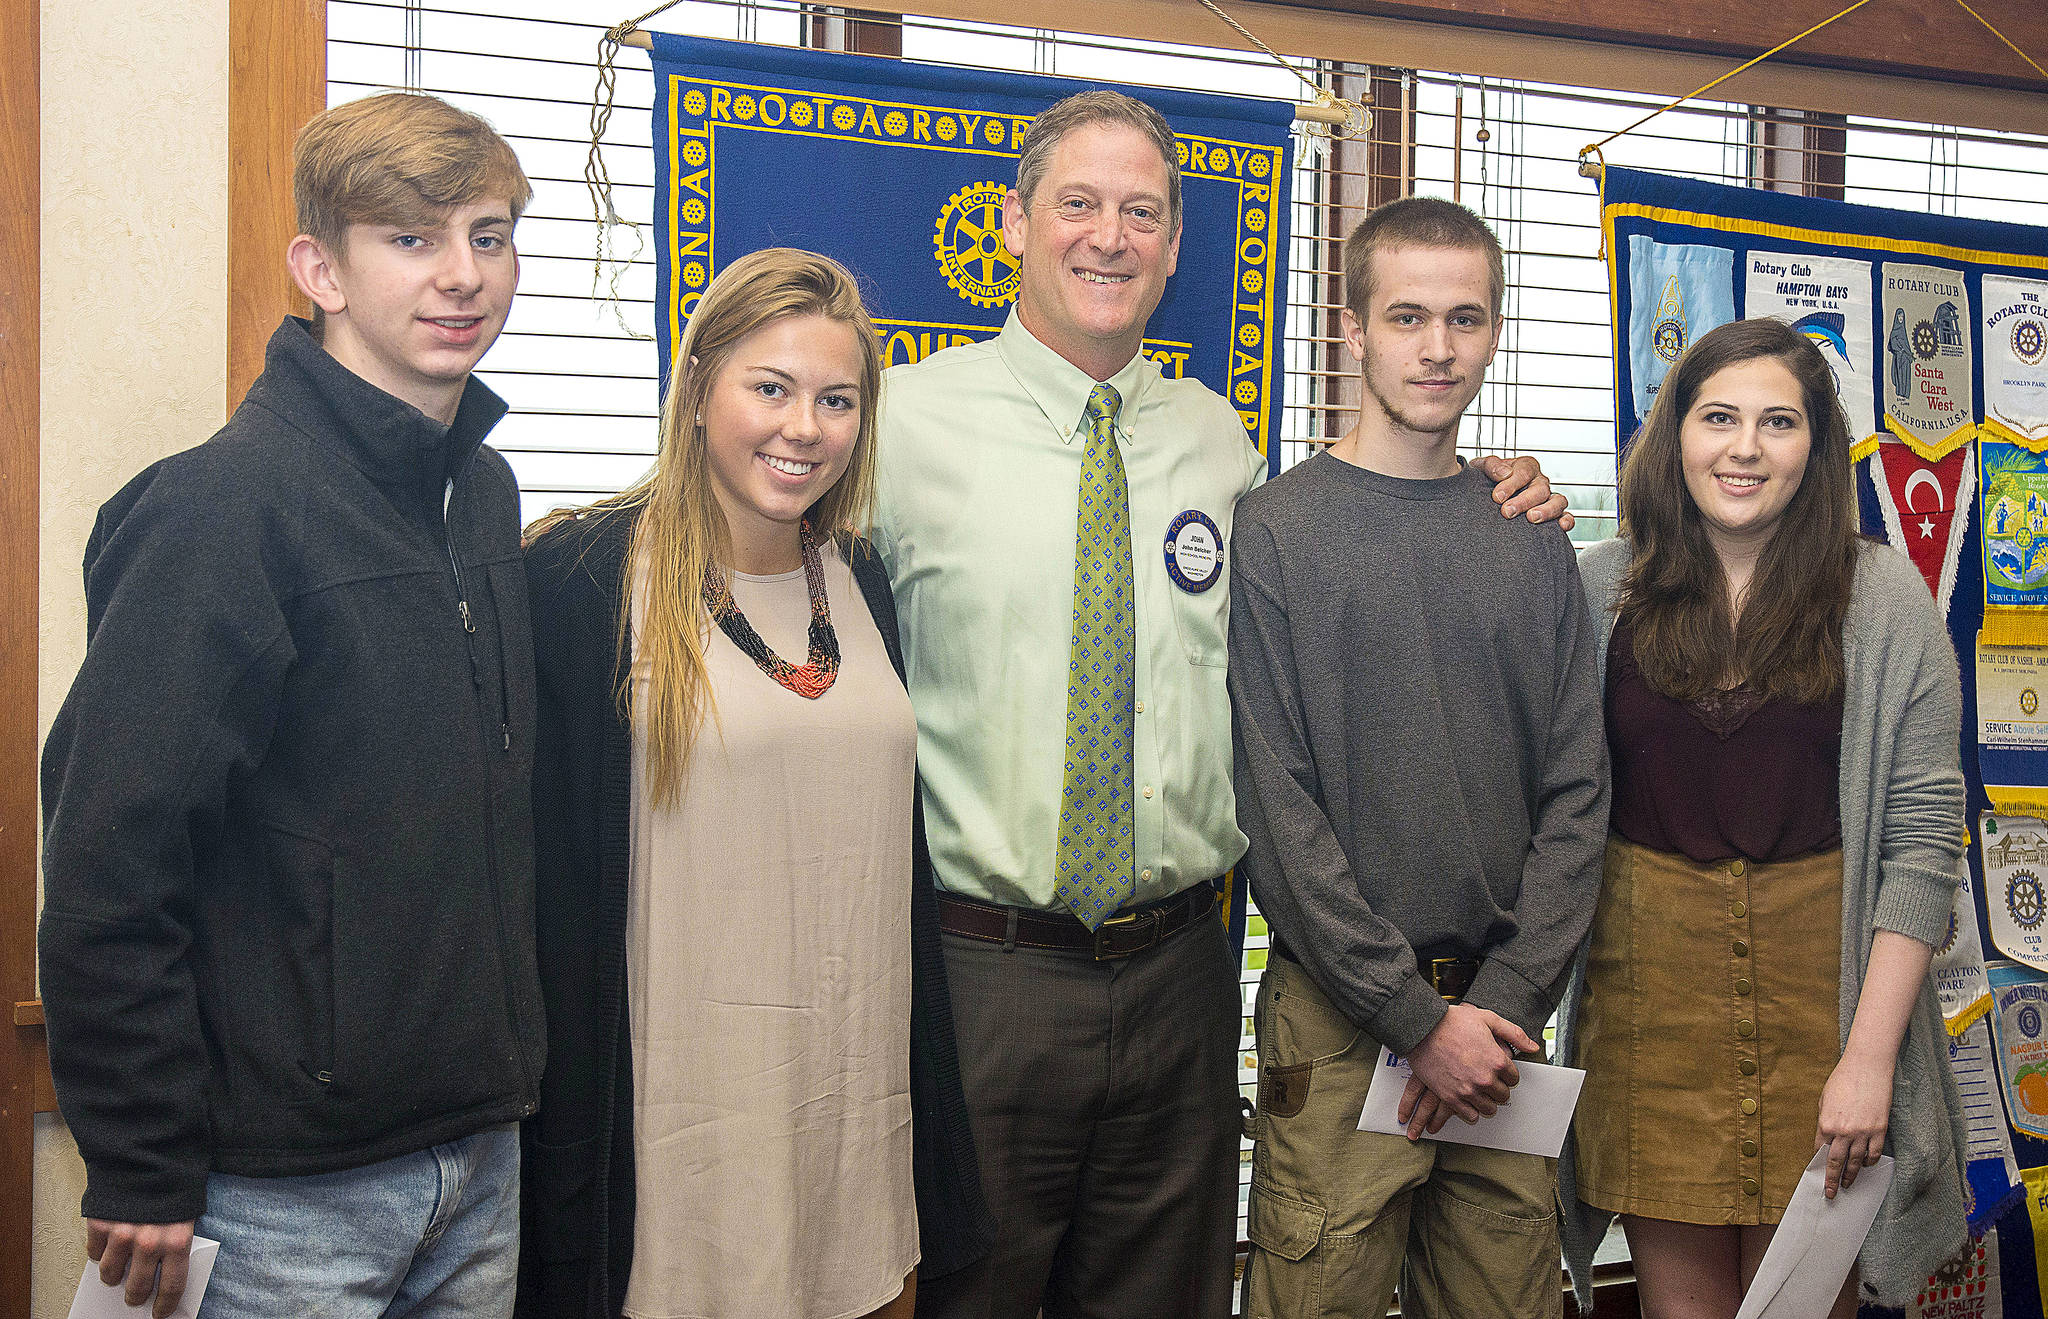 Rotary of Snoqualmie Valley honors Mount Si High School’s Students of the Quarter